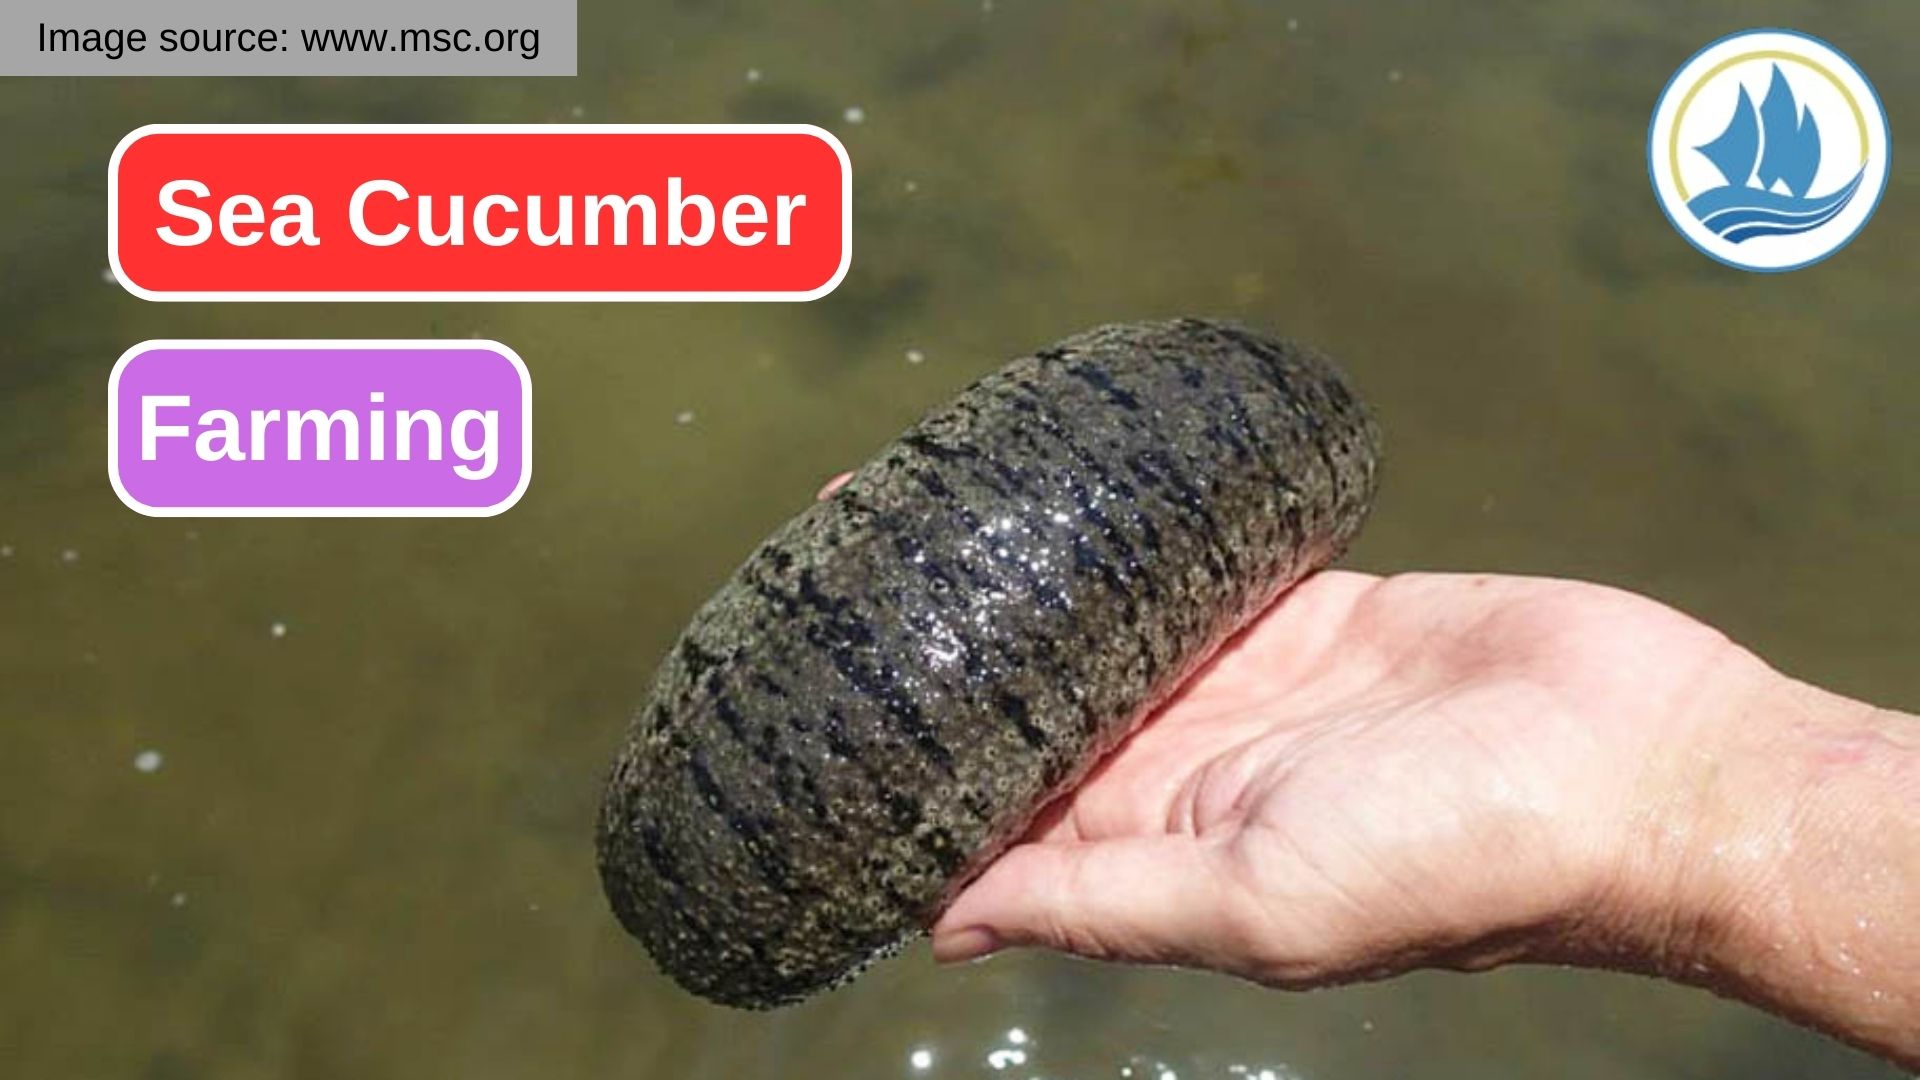 Challenges and Opportunities in Sea Cucumber Farming